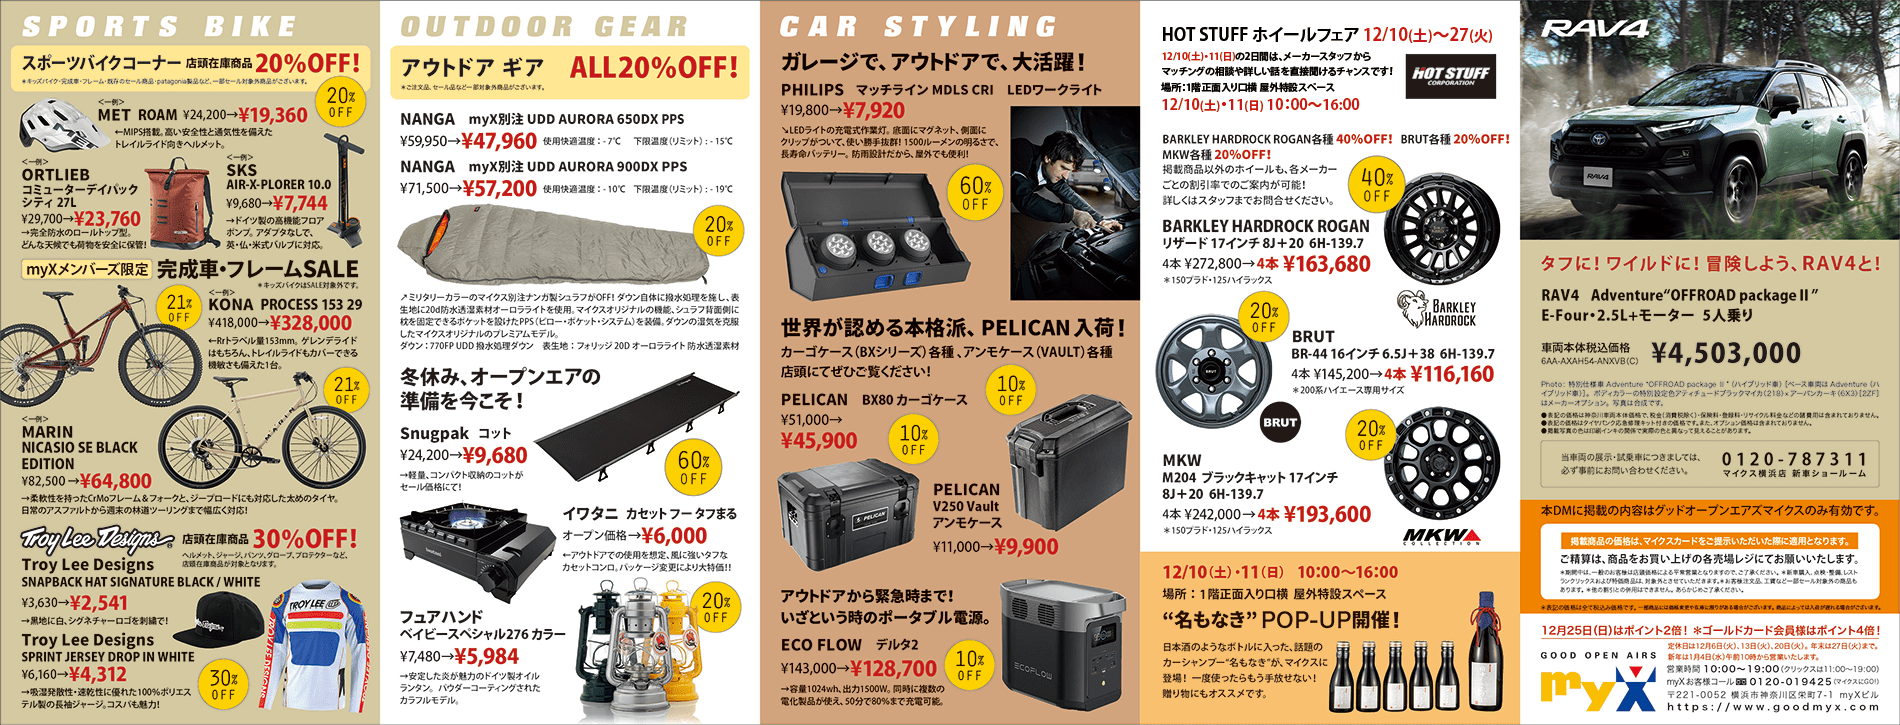 WINTER SPECIAL SALE For All Members 2022/12/9FRI-27TUE開催　裏面